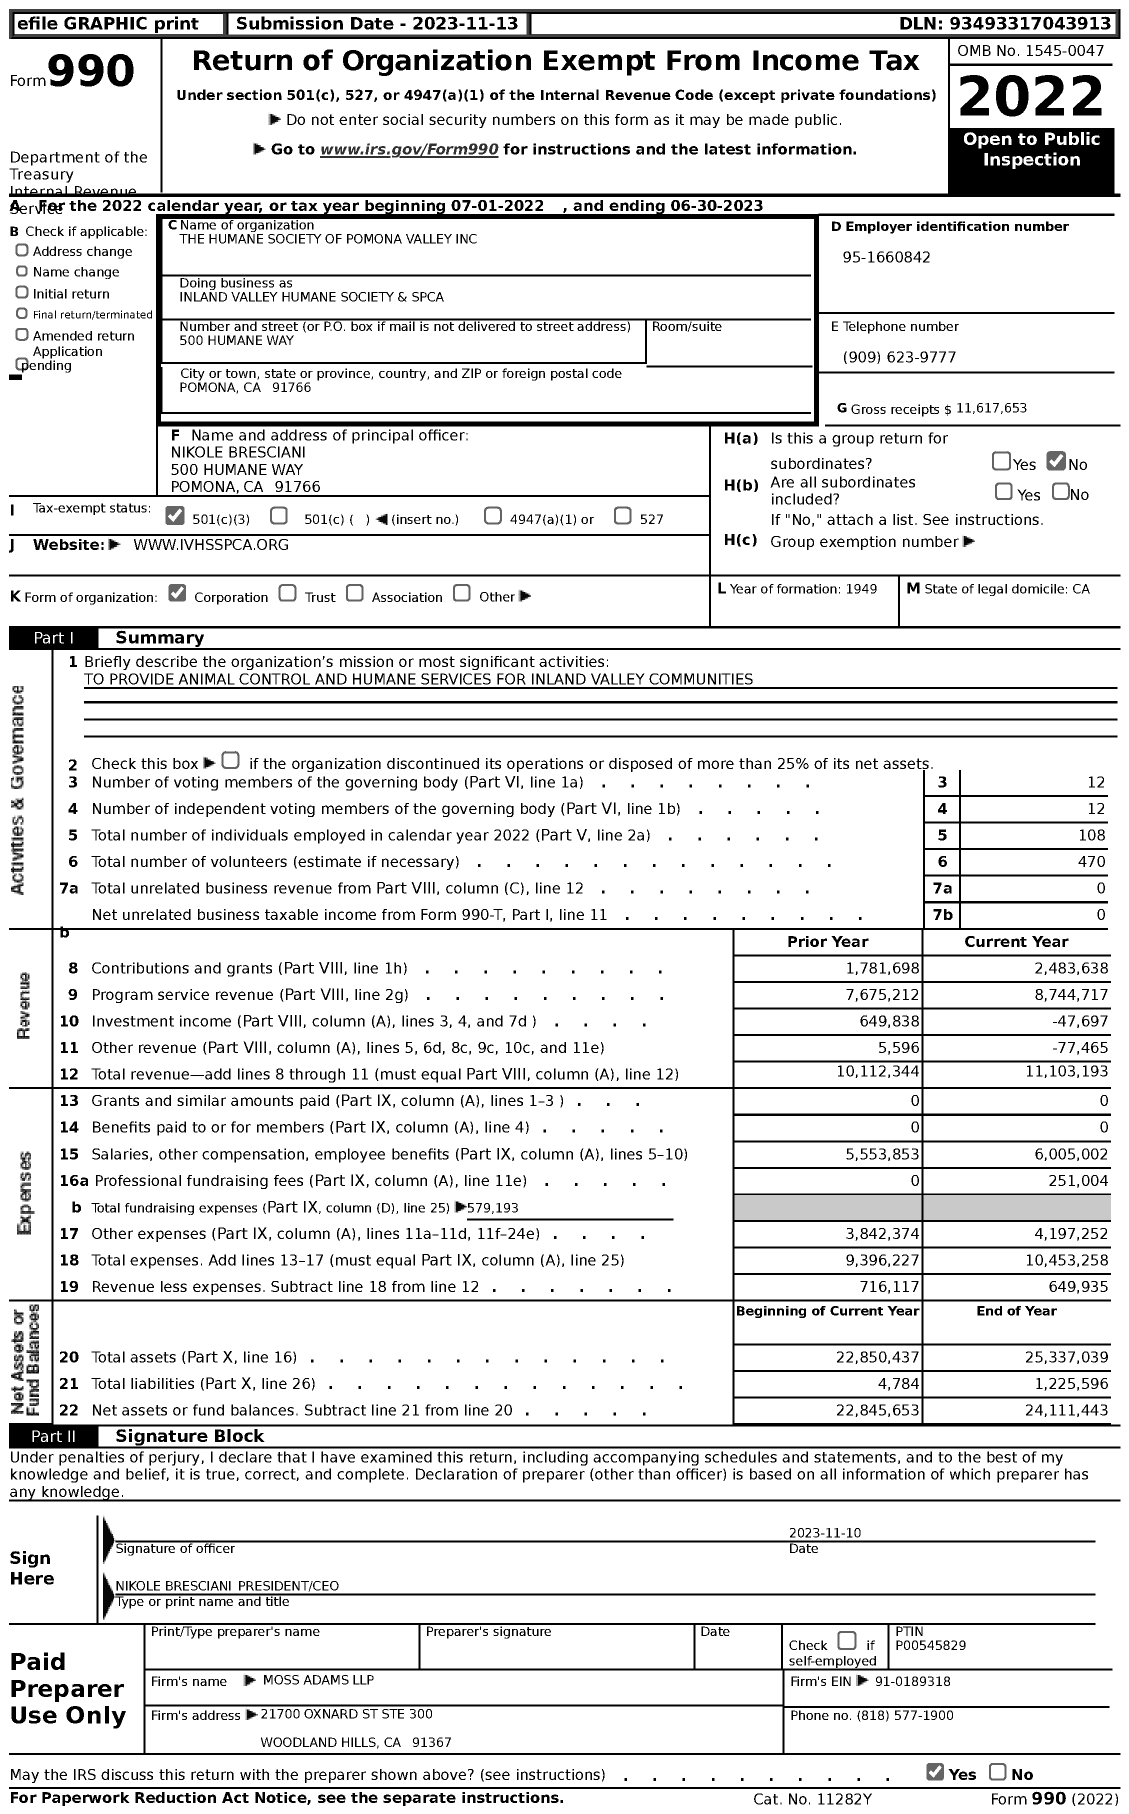 Image of first page of 2022 Form 990 for Inland Valley Humane Society and Spca